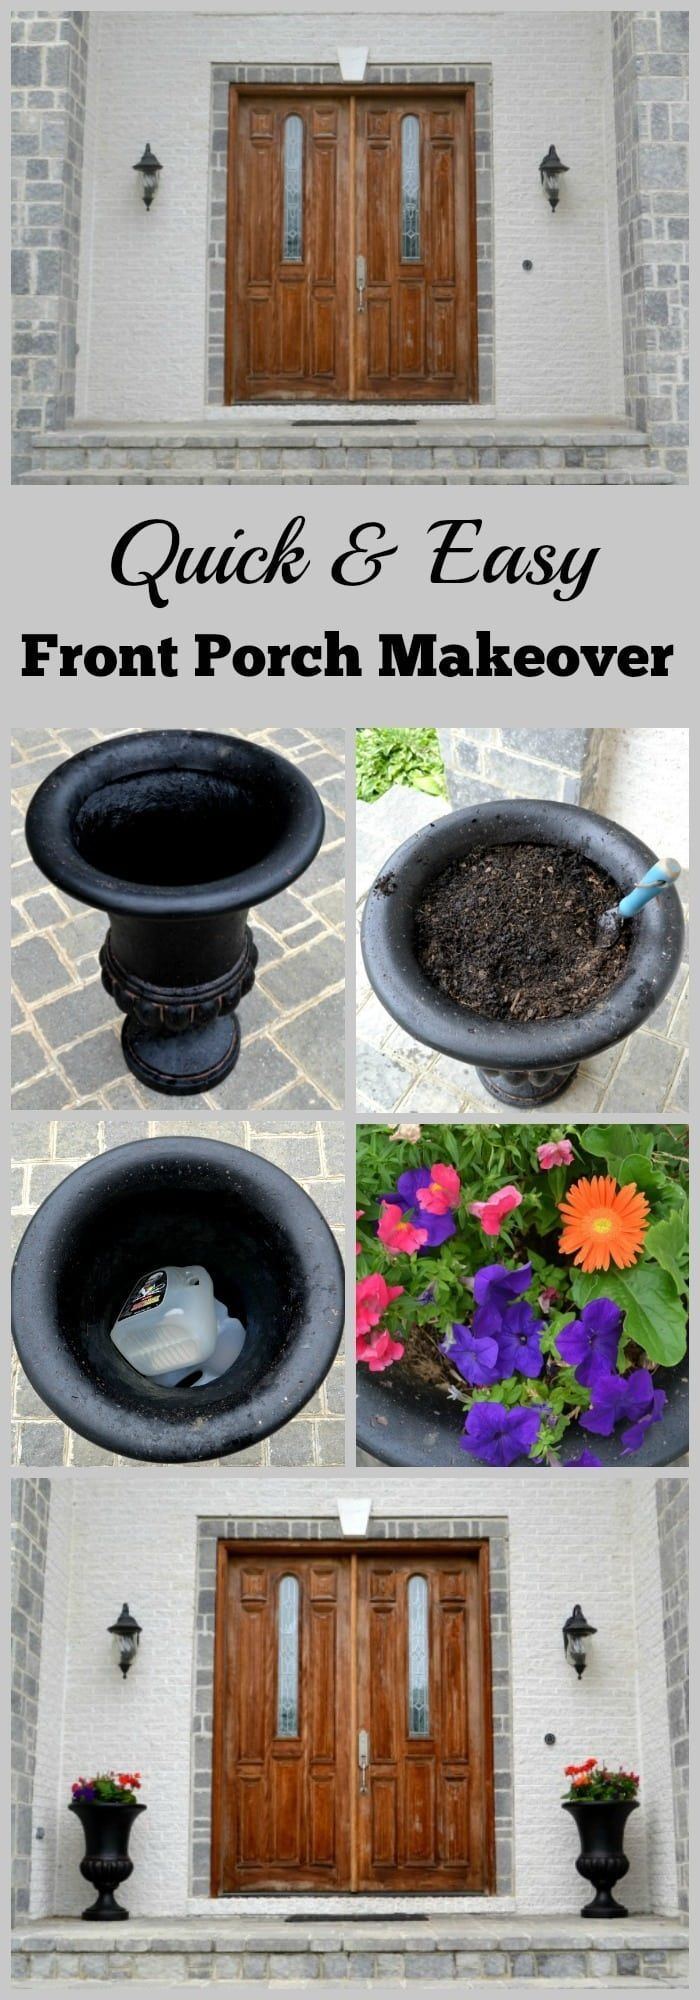 Quick & Easy Project to Enhance Your Home's Curb Appeal -   17 diy projects Outdoor curb appeal ideas